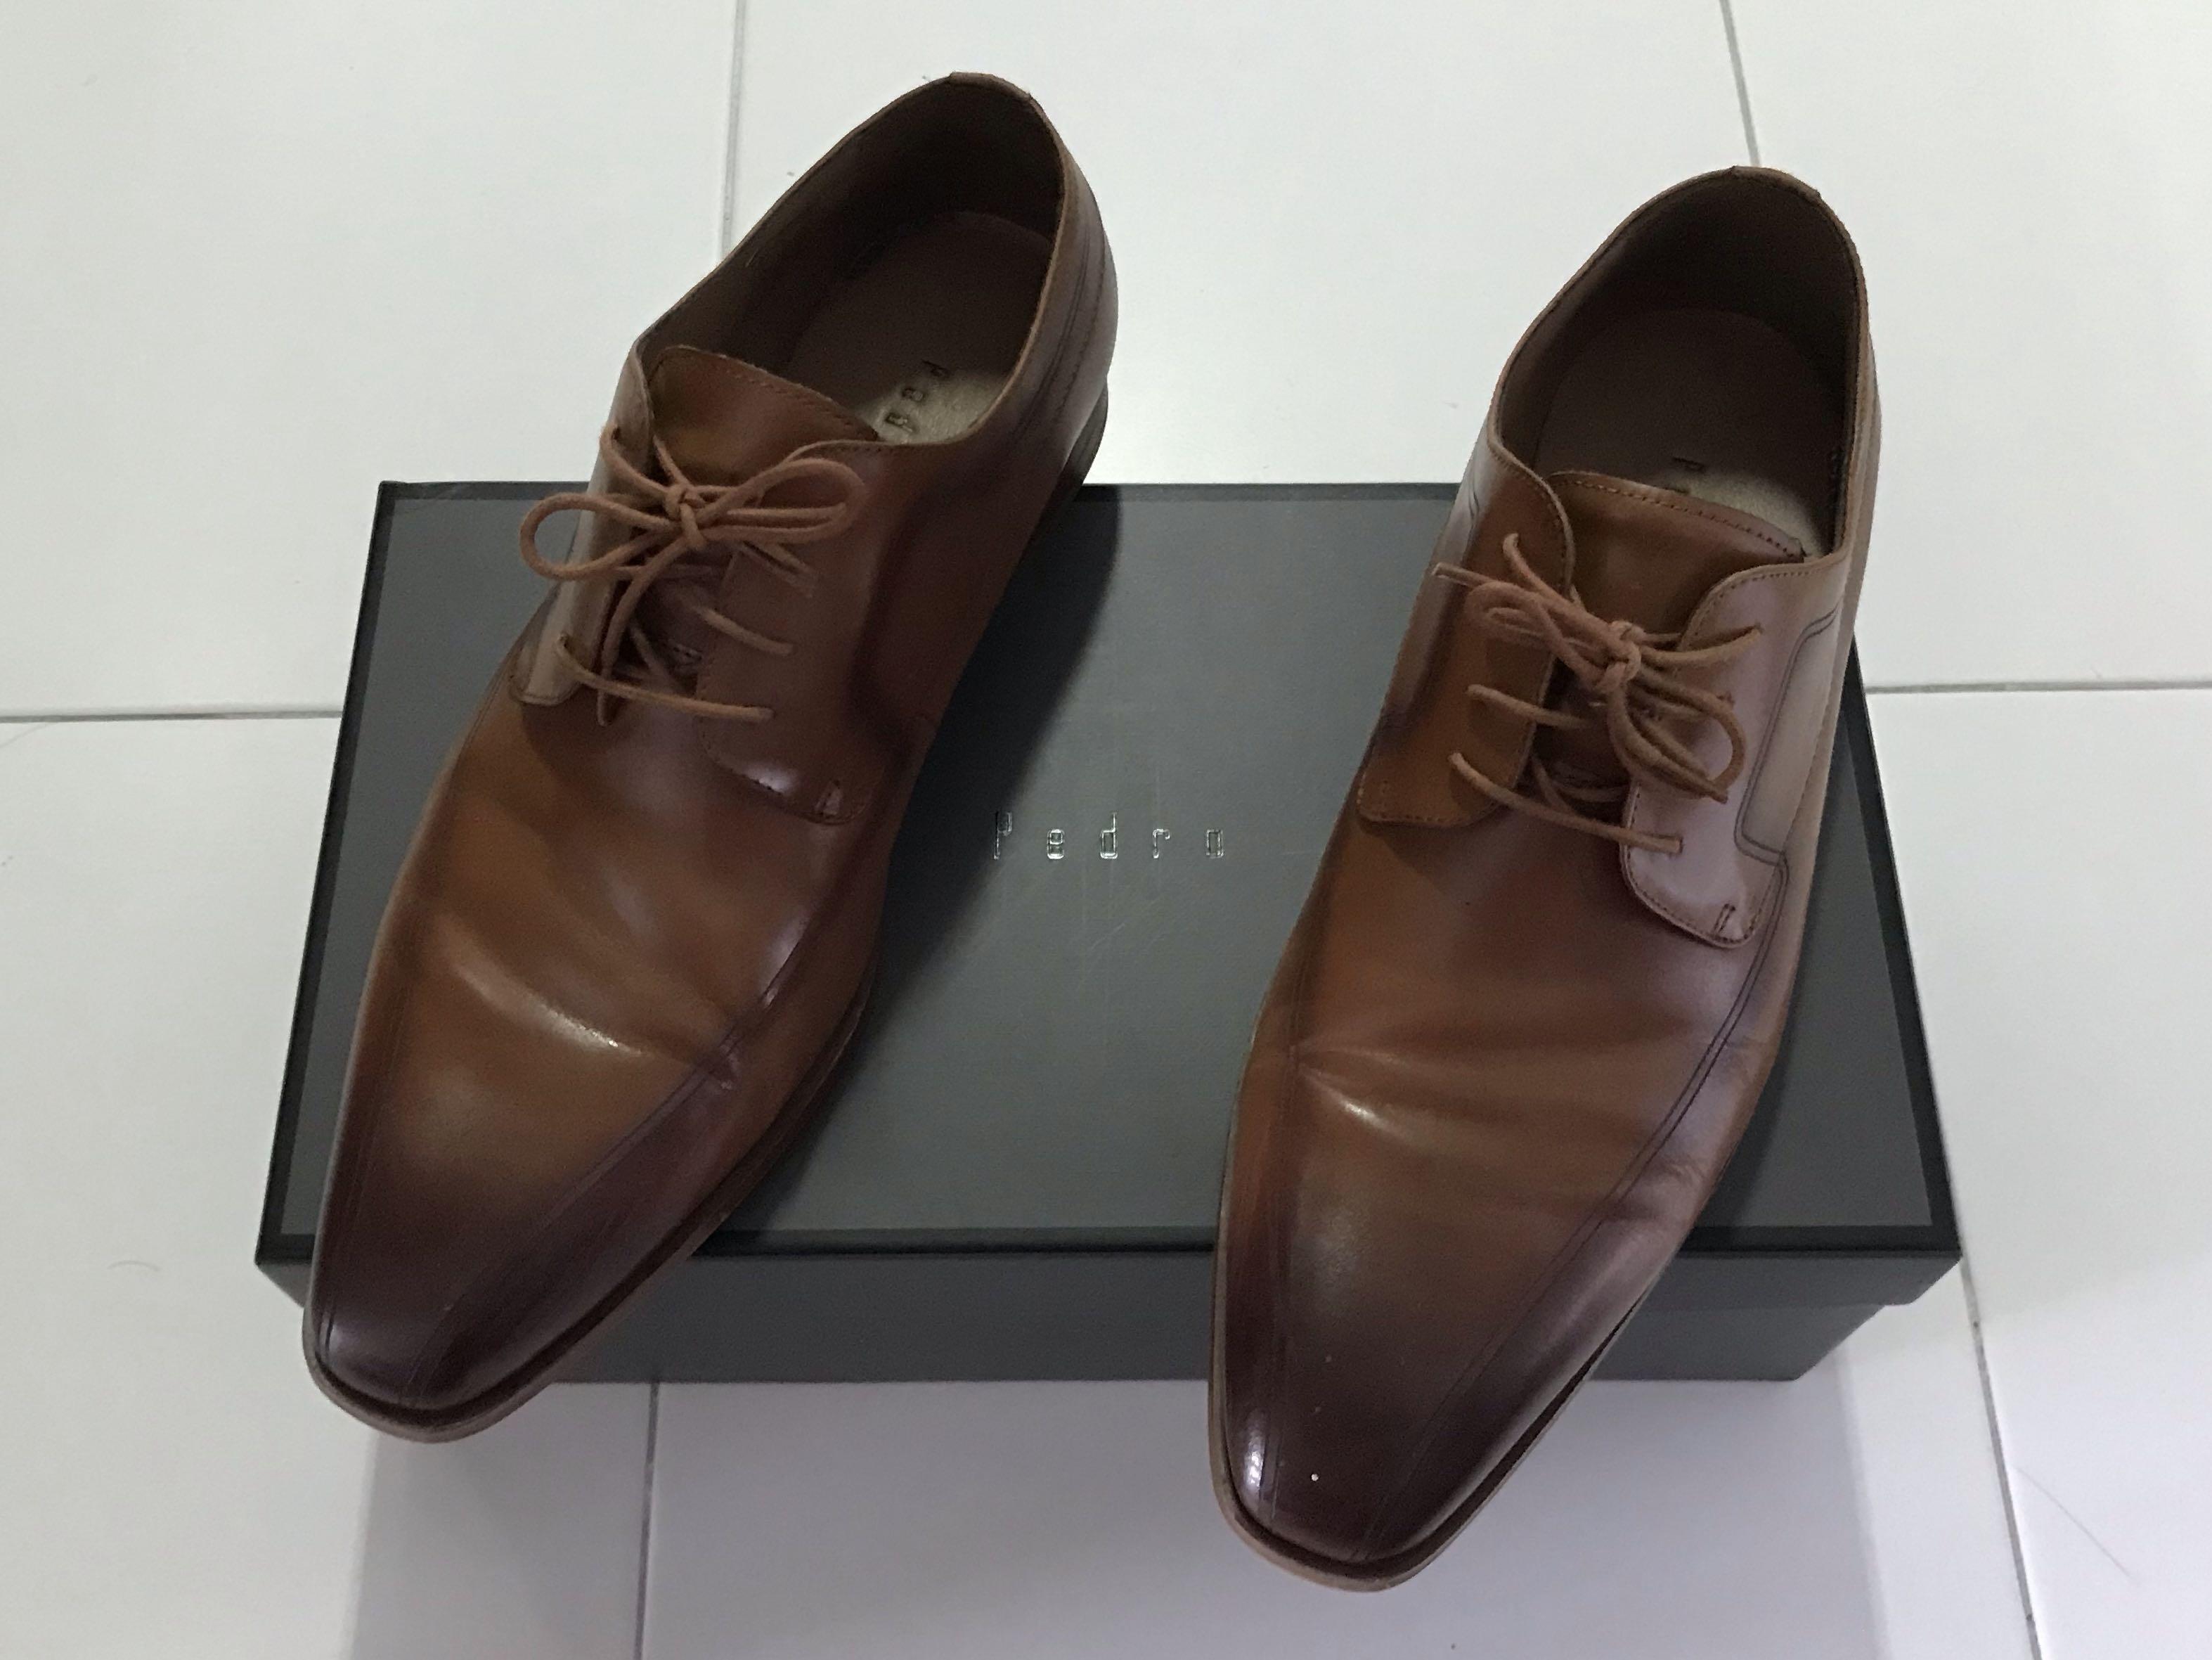 Pedro leather shoes for sale, Men's 